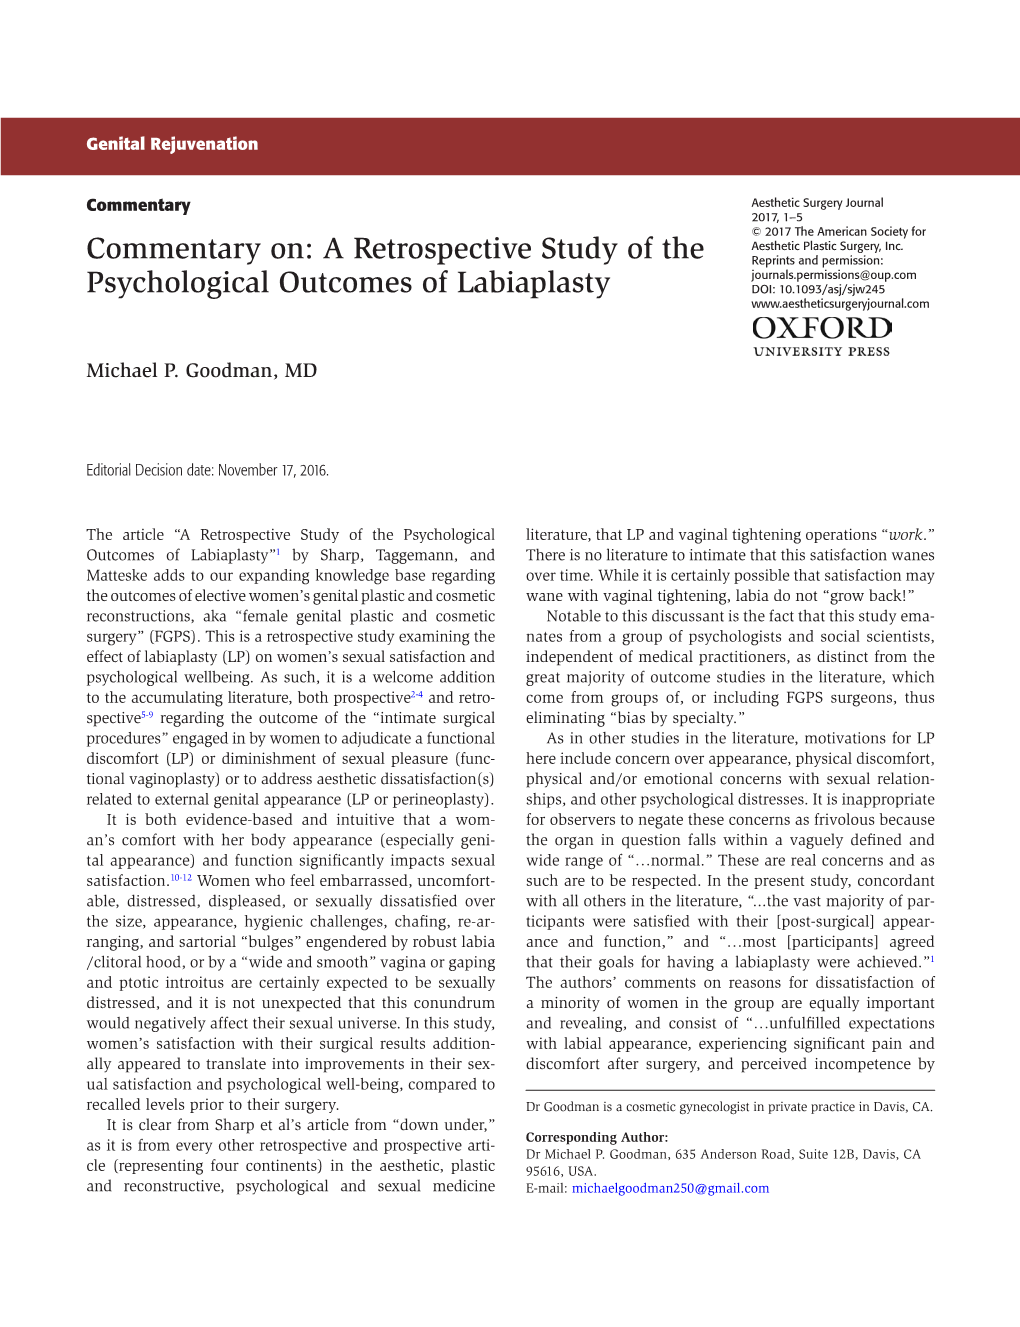 Commentary On: a Retrospective Study of the Psychological